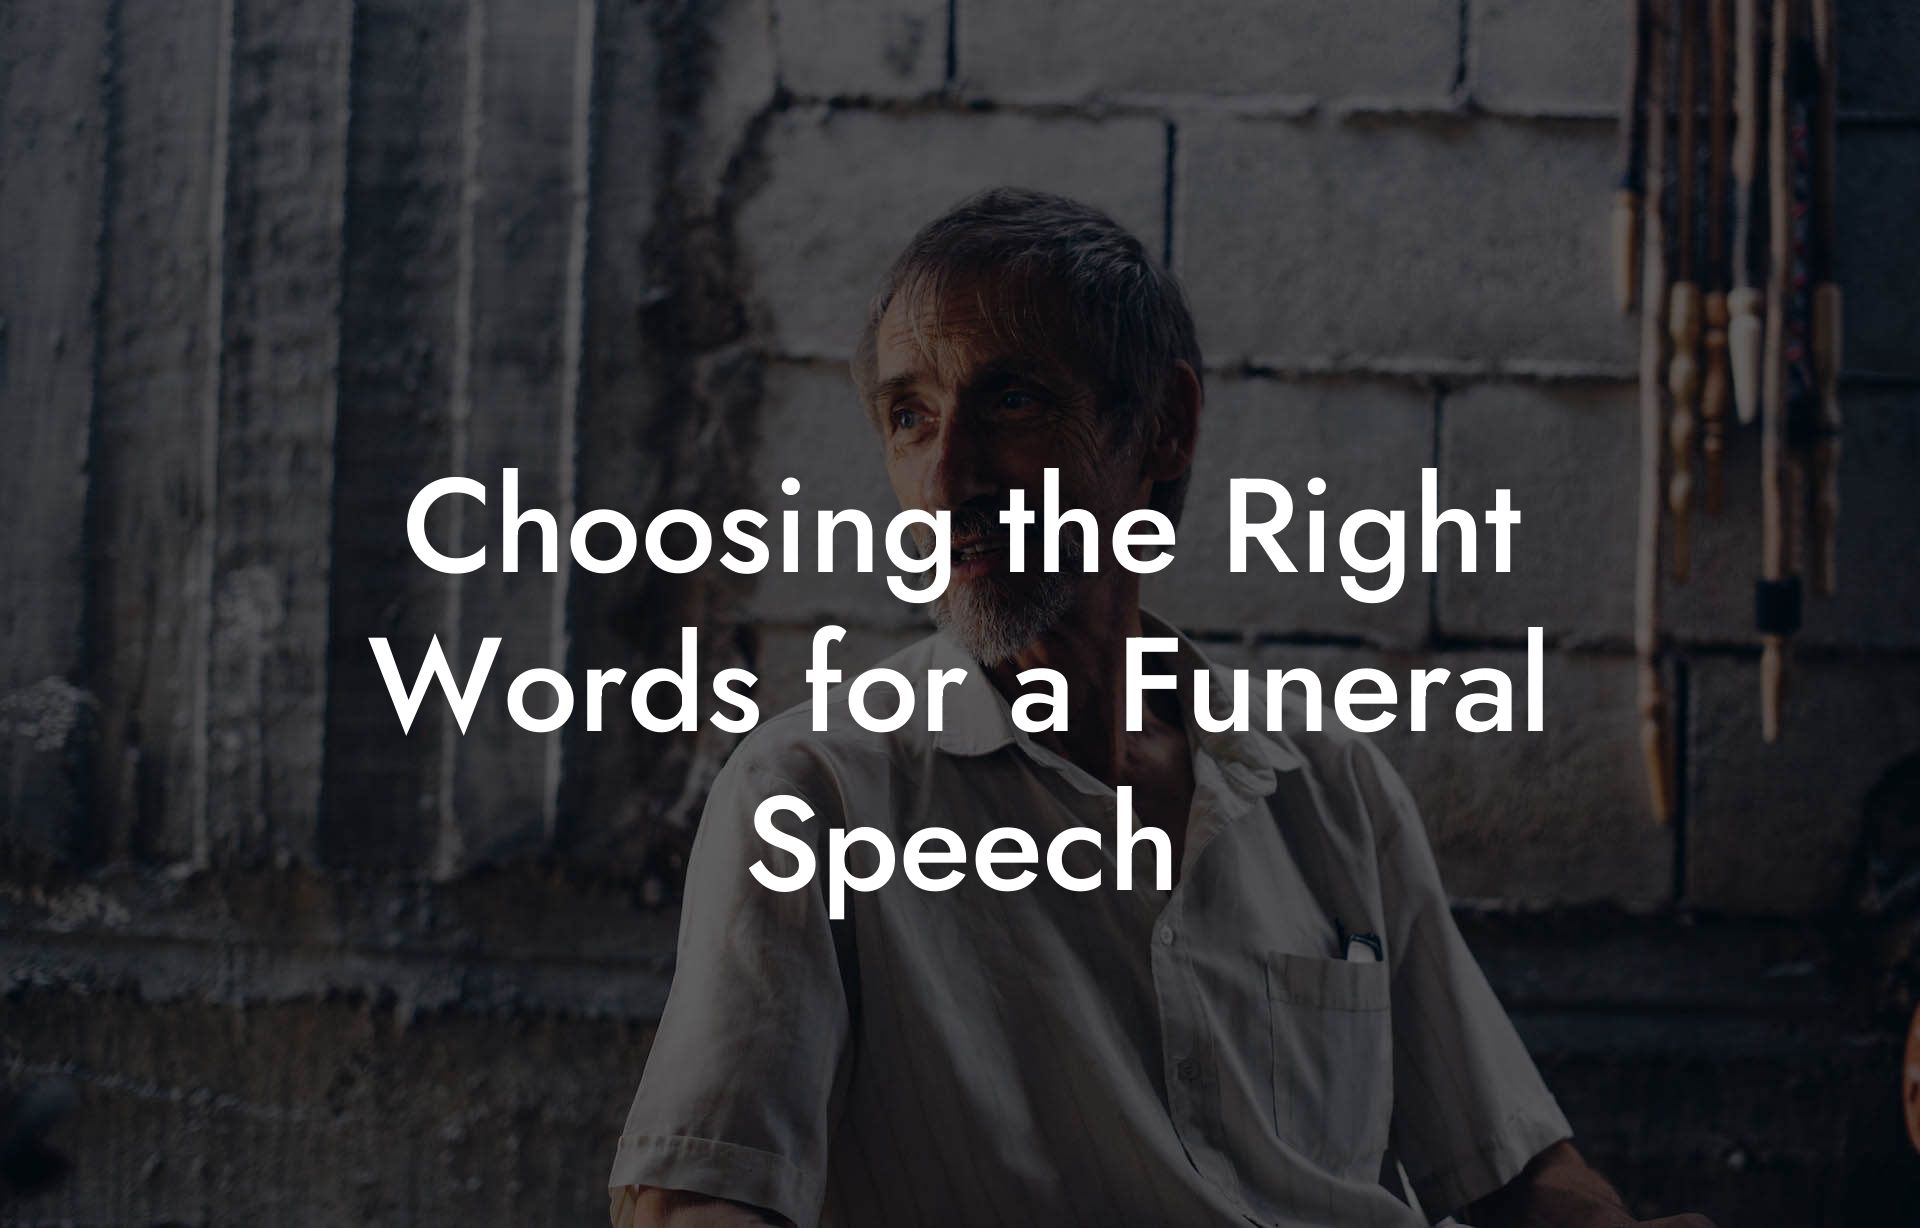 Choosing the Right Words for a Funeral Speech